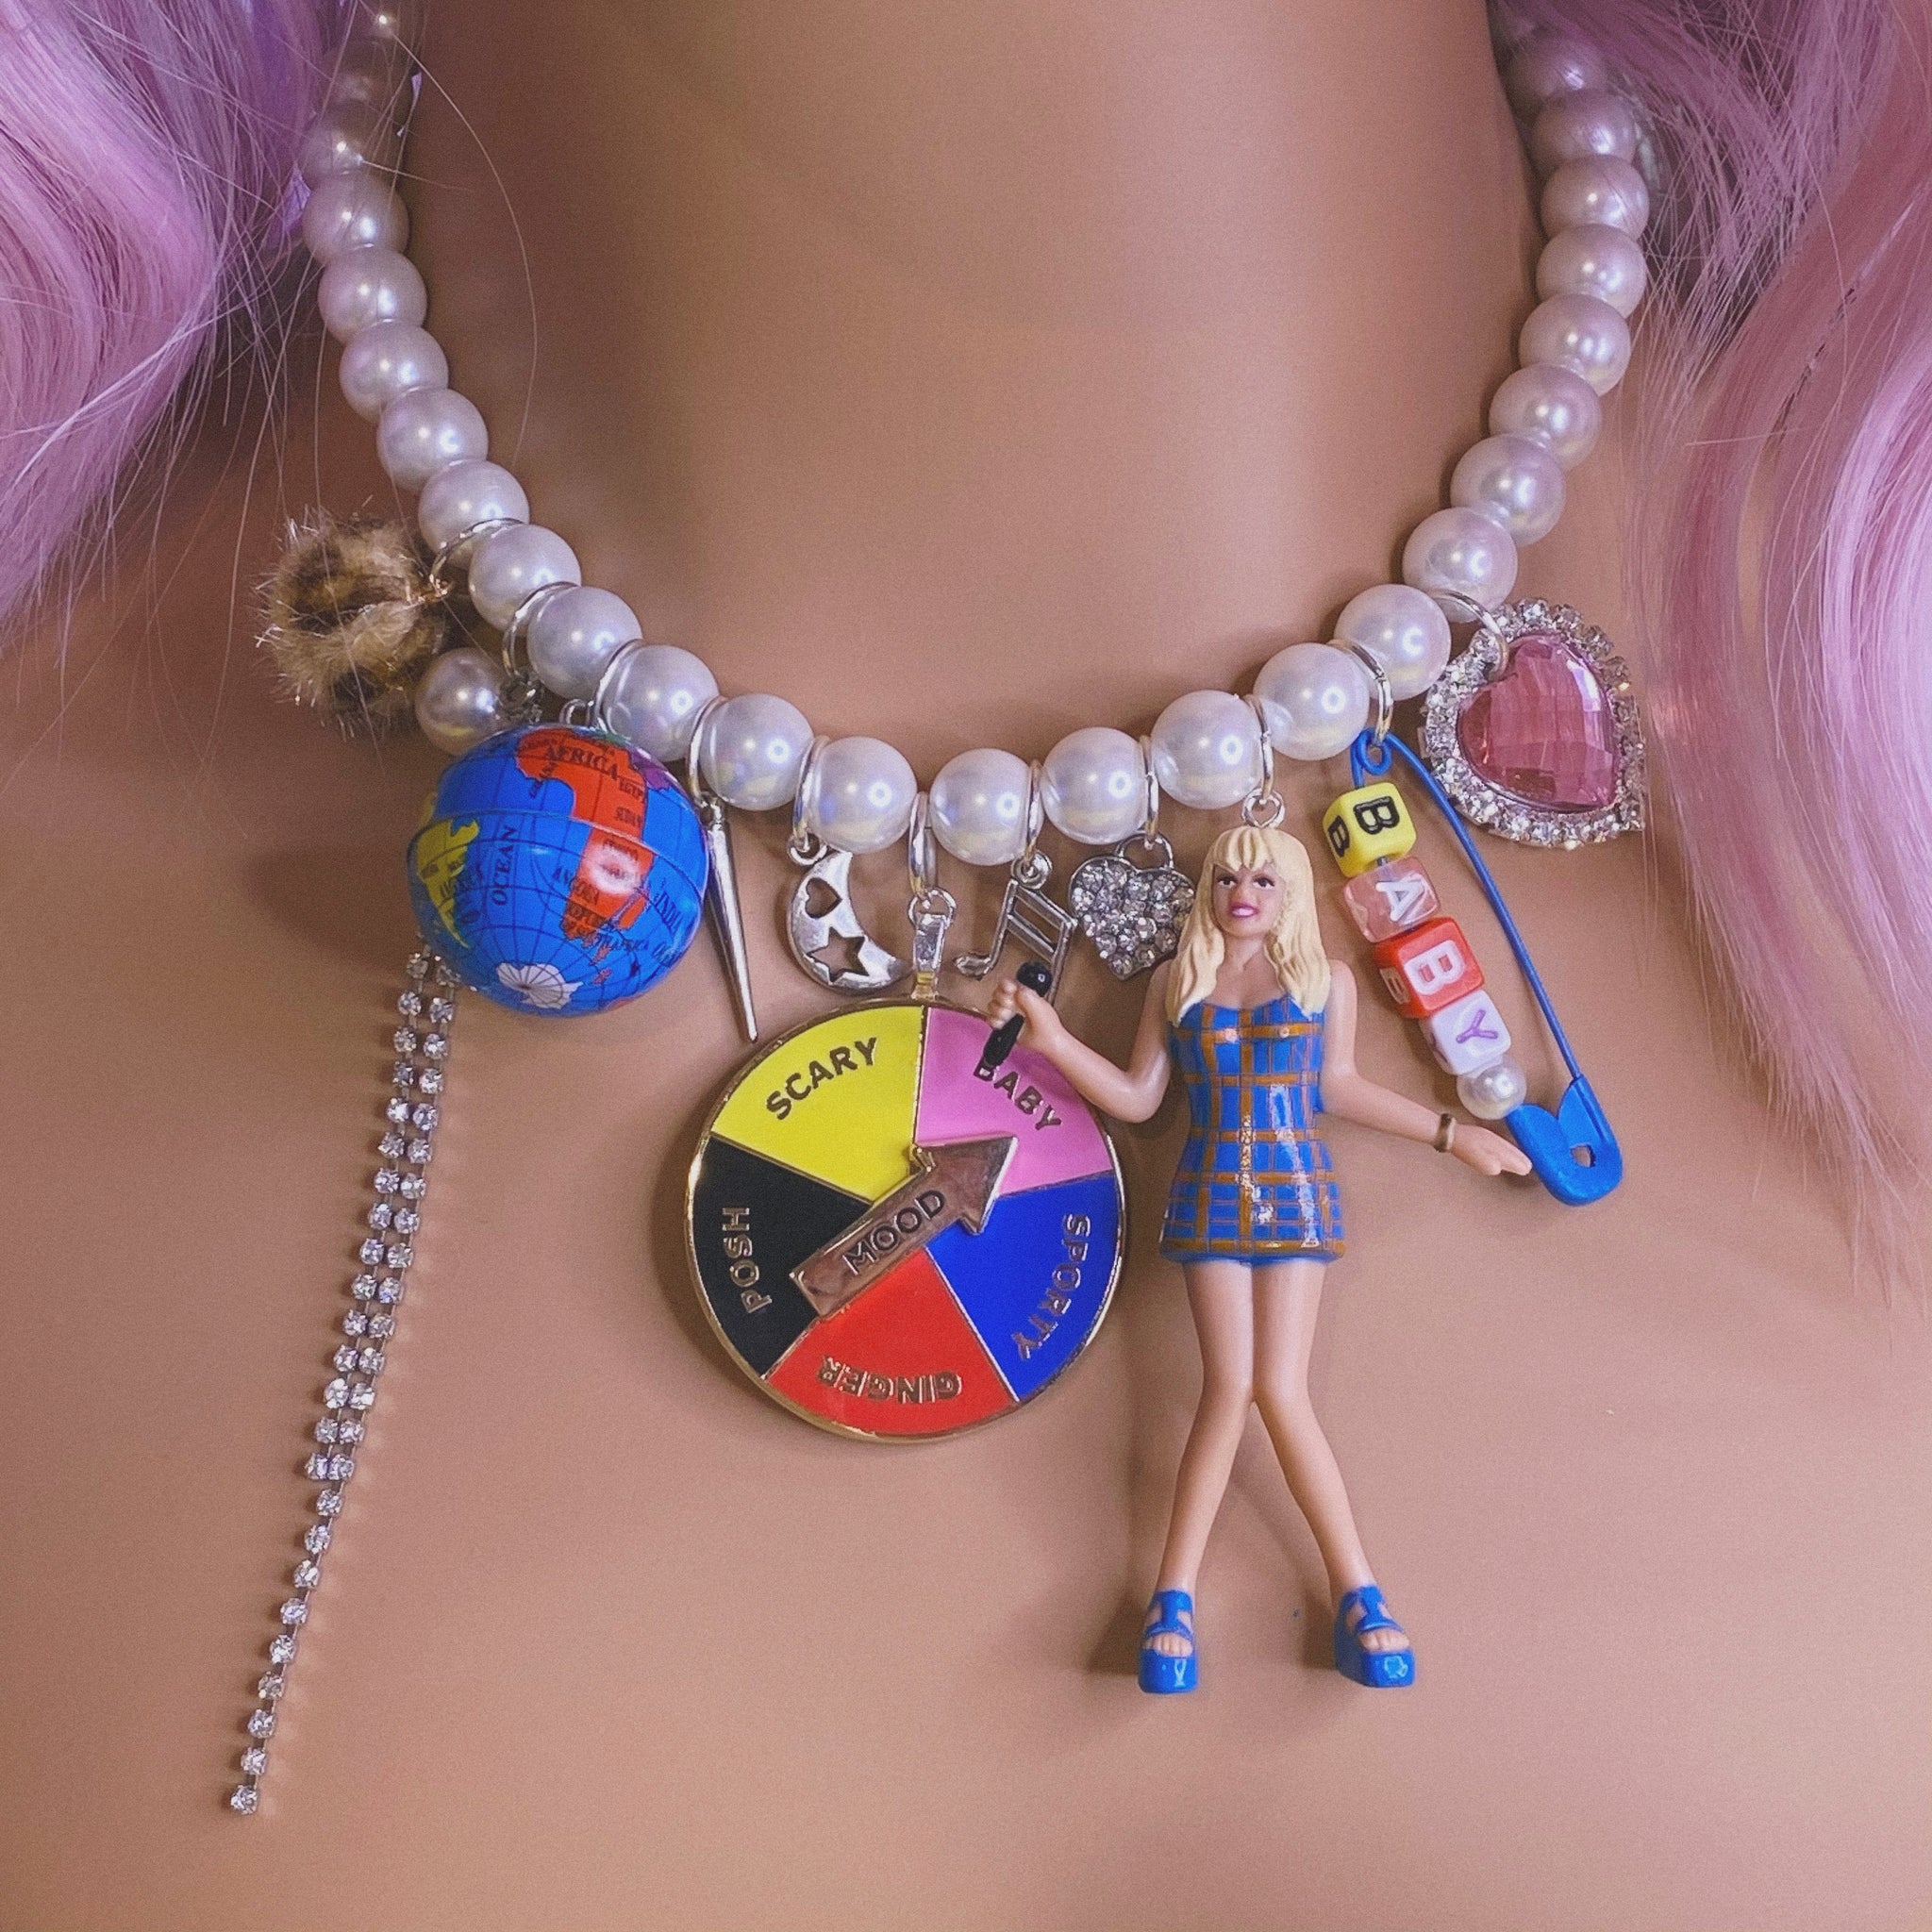 1998 Baby Spice Charm Necklace